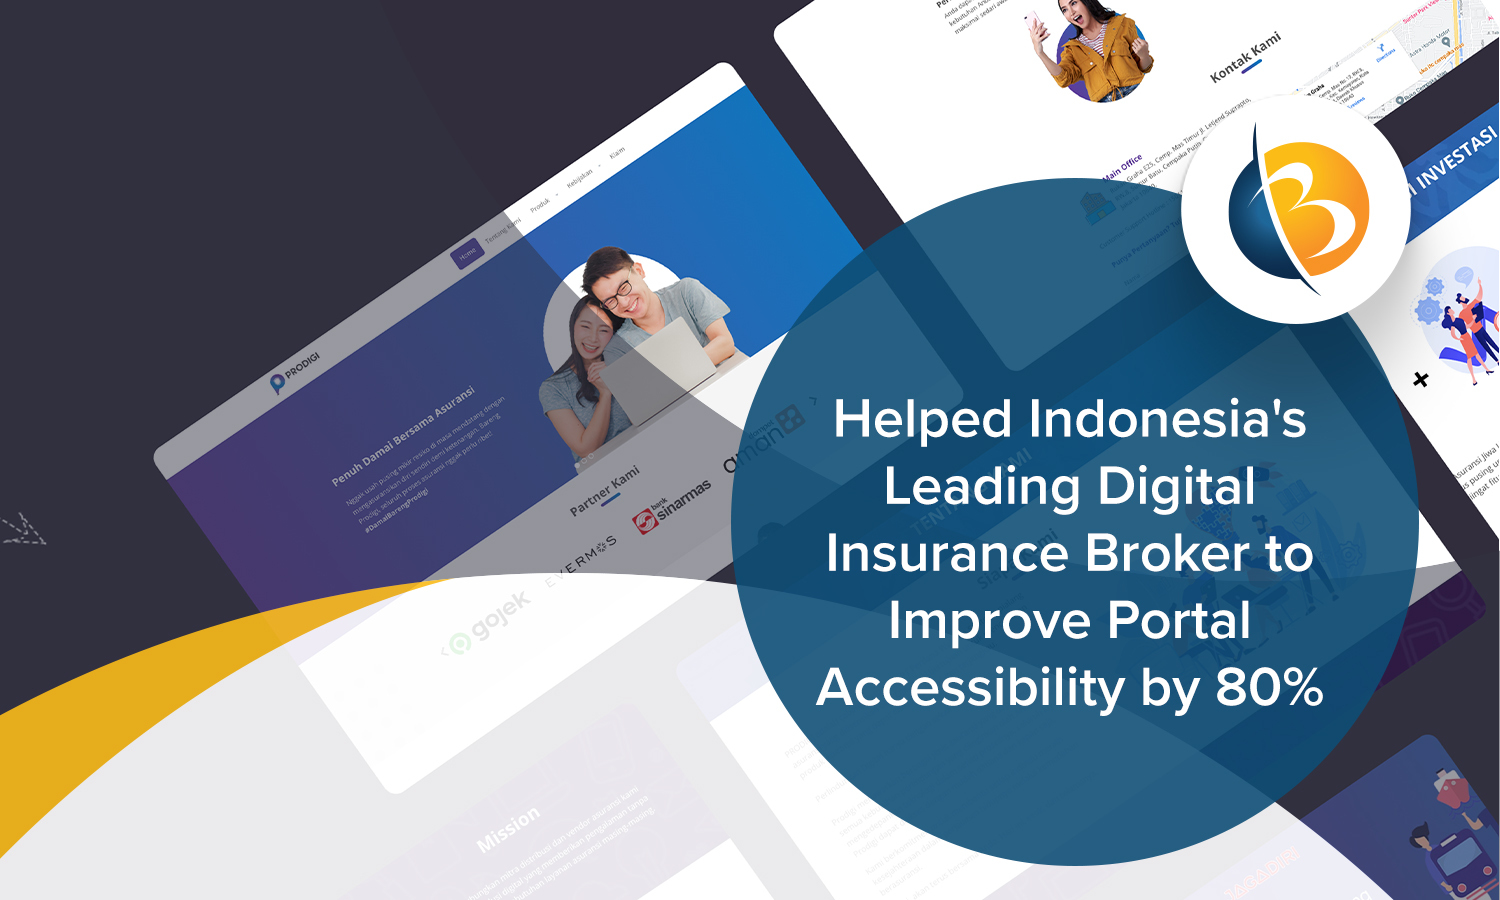 Helped Indonesia's Leading Digital Insurance Broker to Improve Portal Accessibility by 80 percent